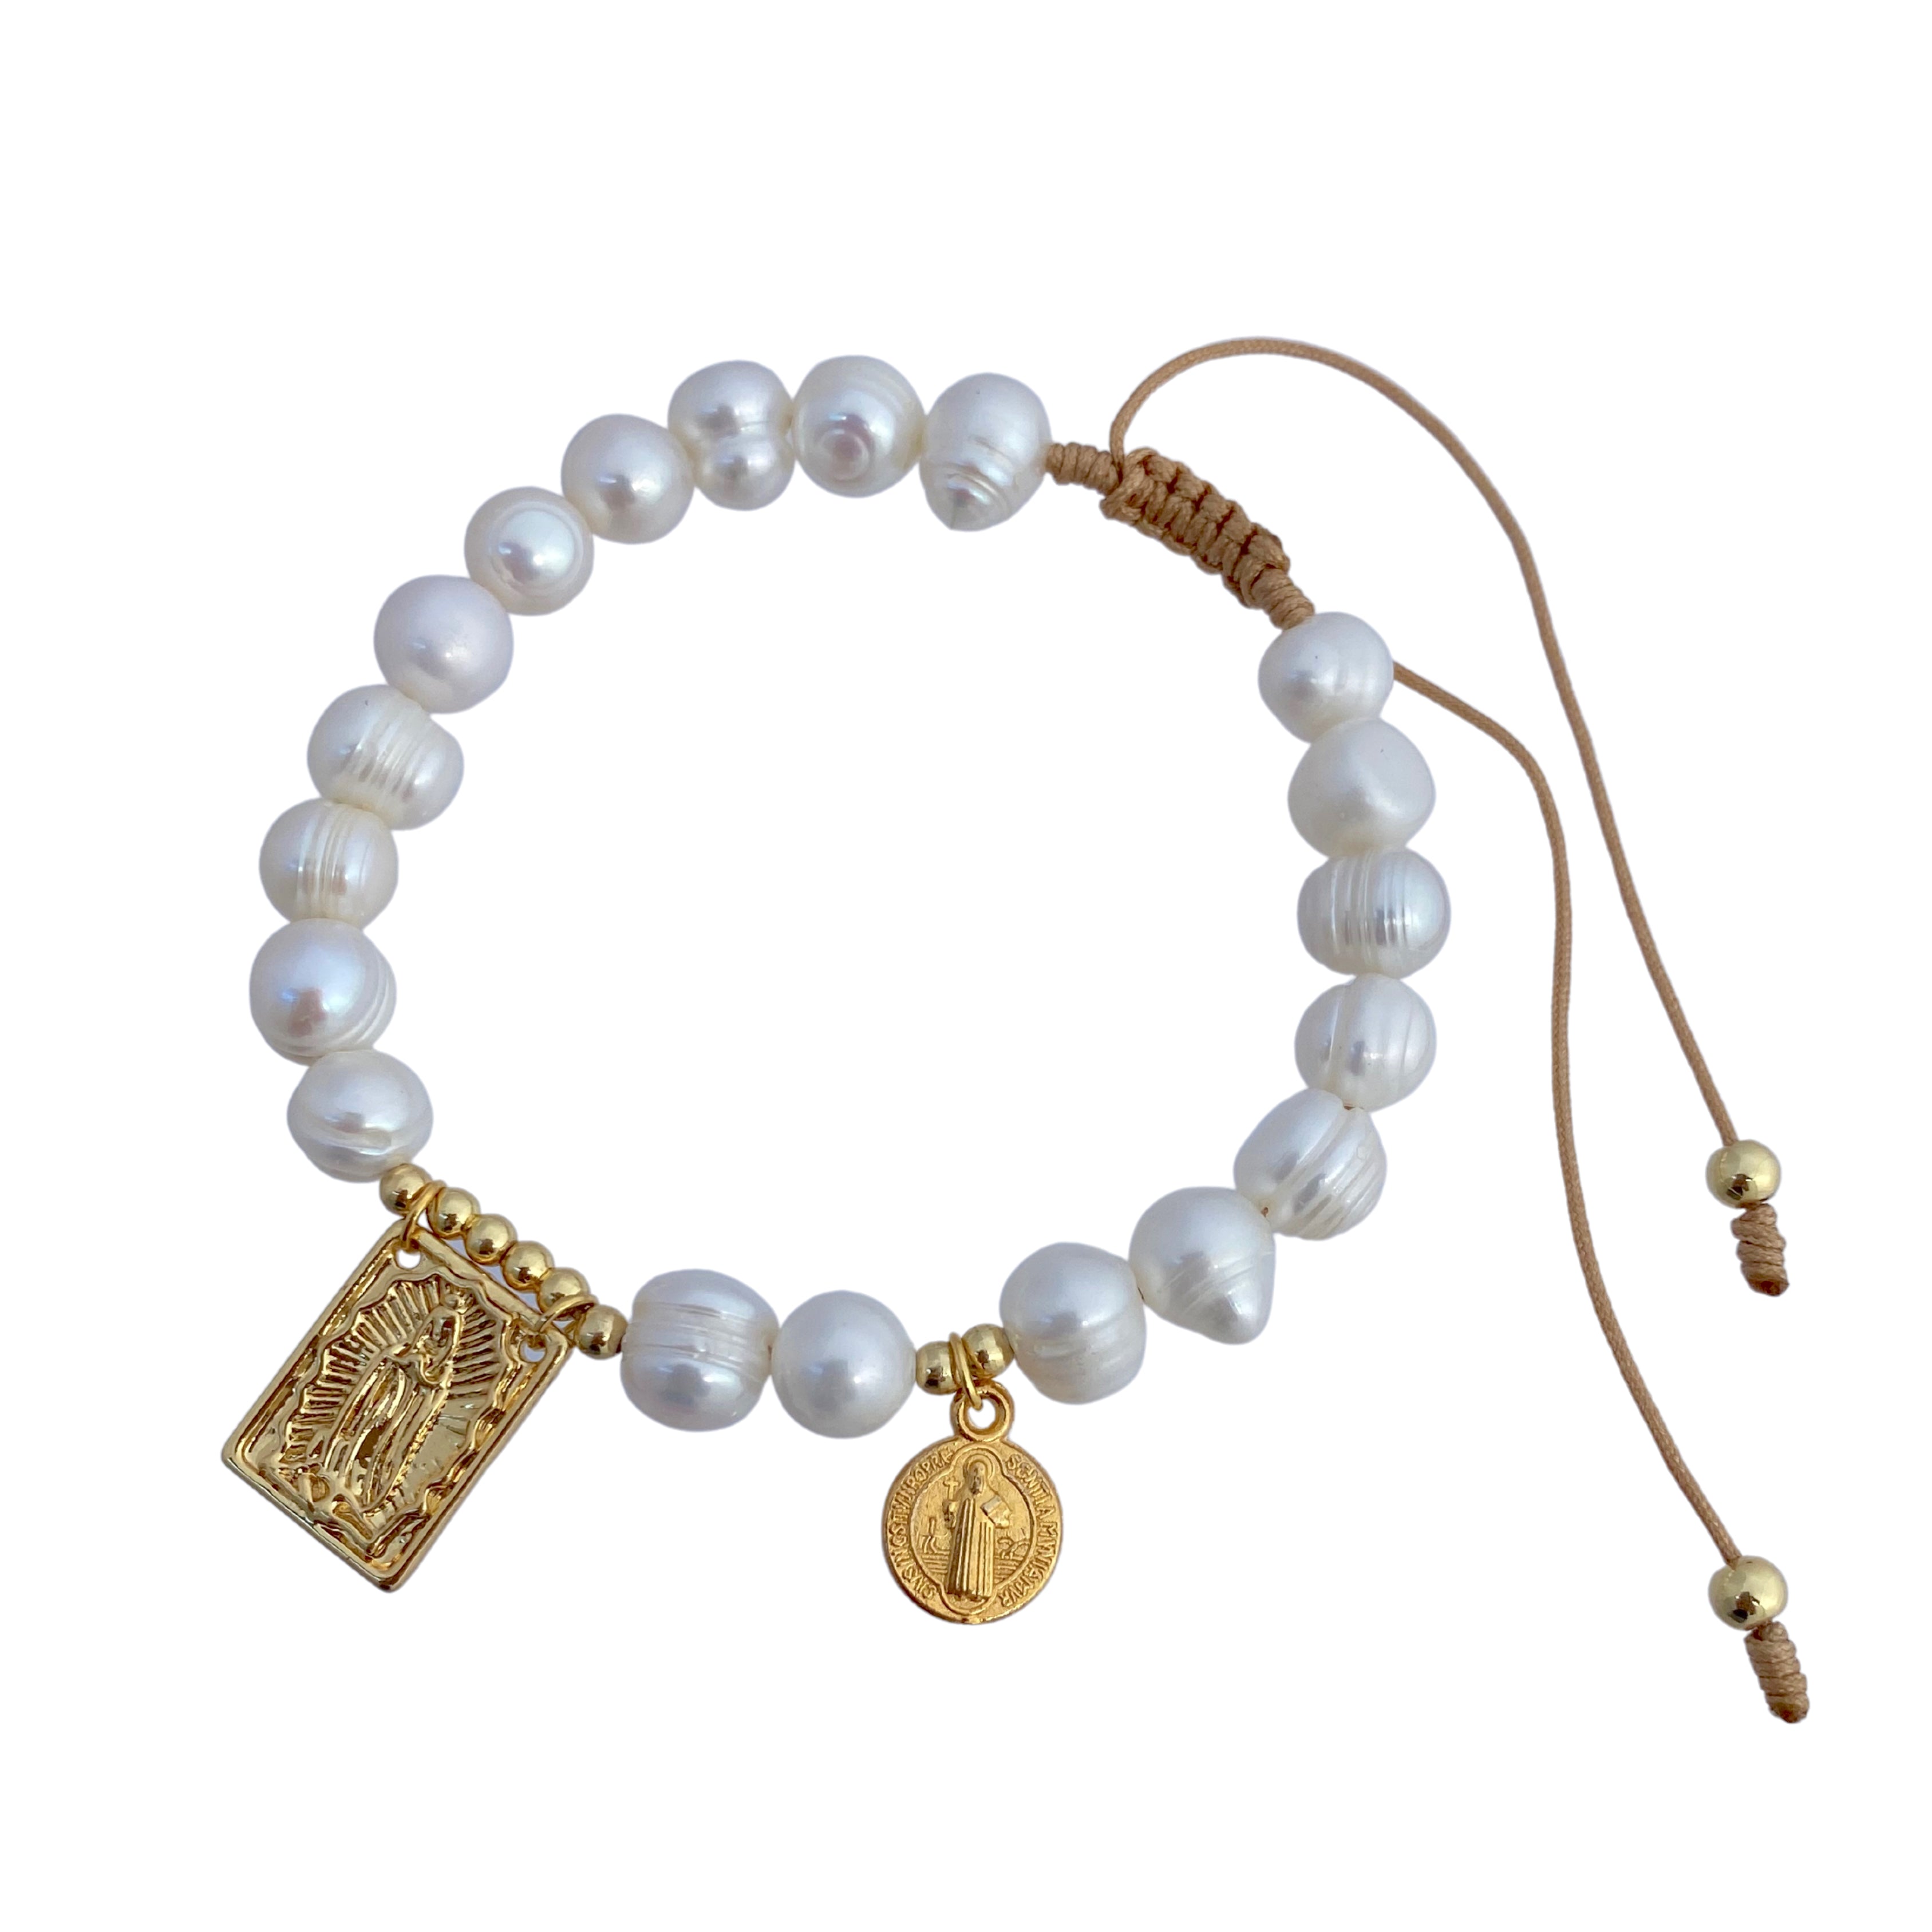 Our Lady of Guadalupe with San Benito Pearl Bracelet